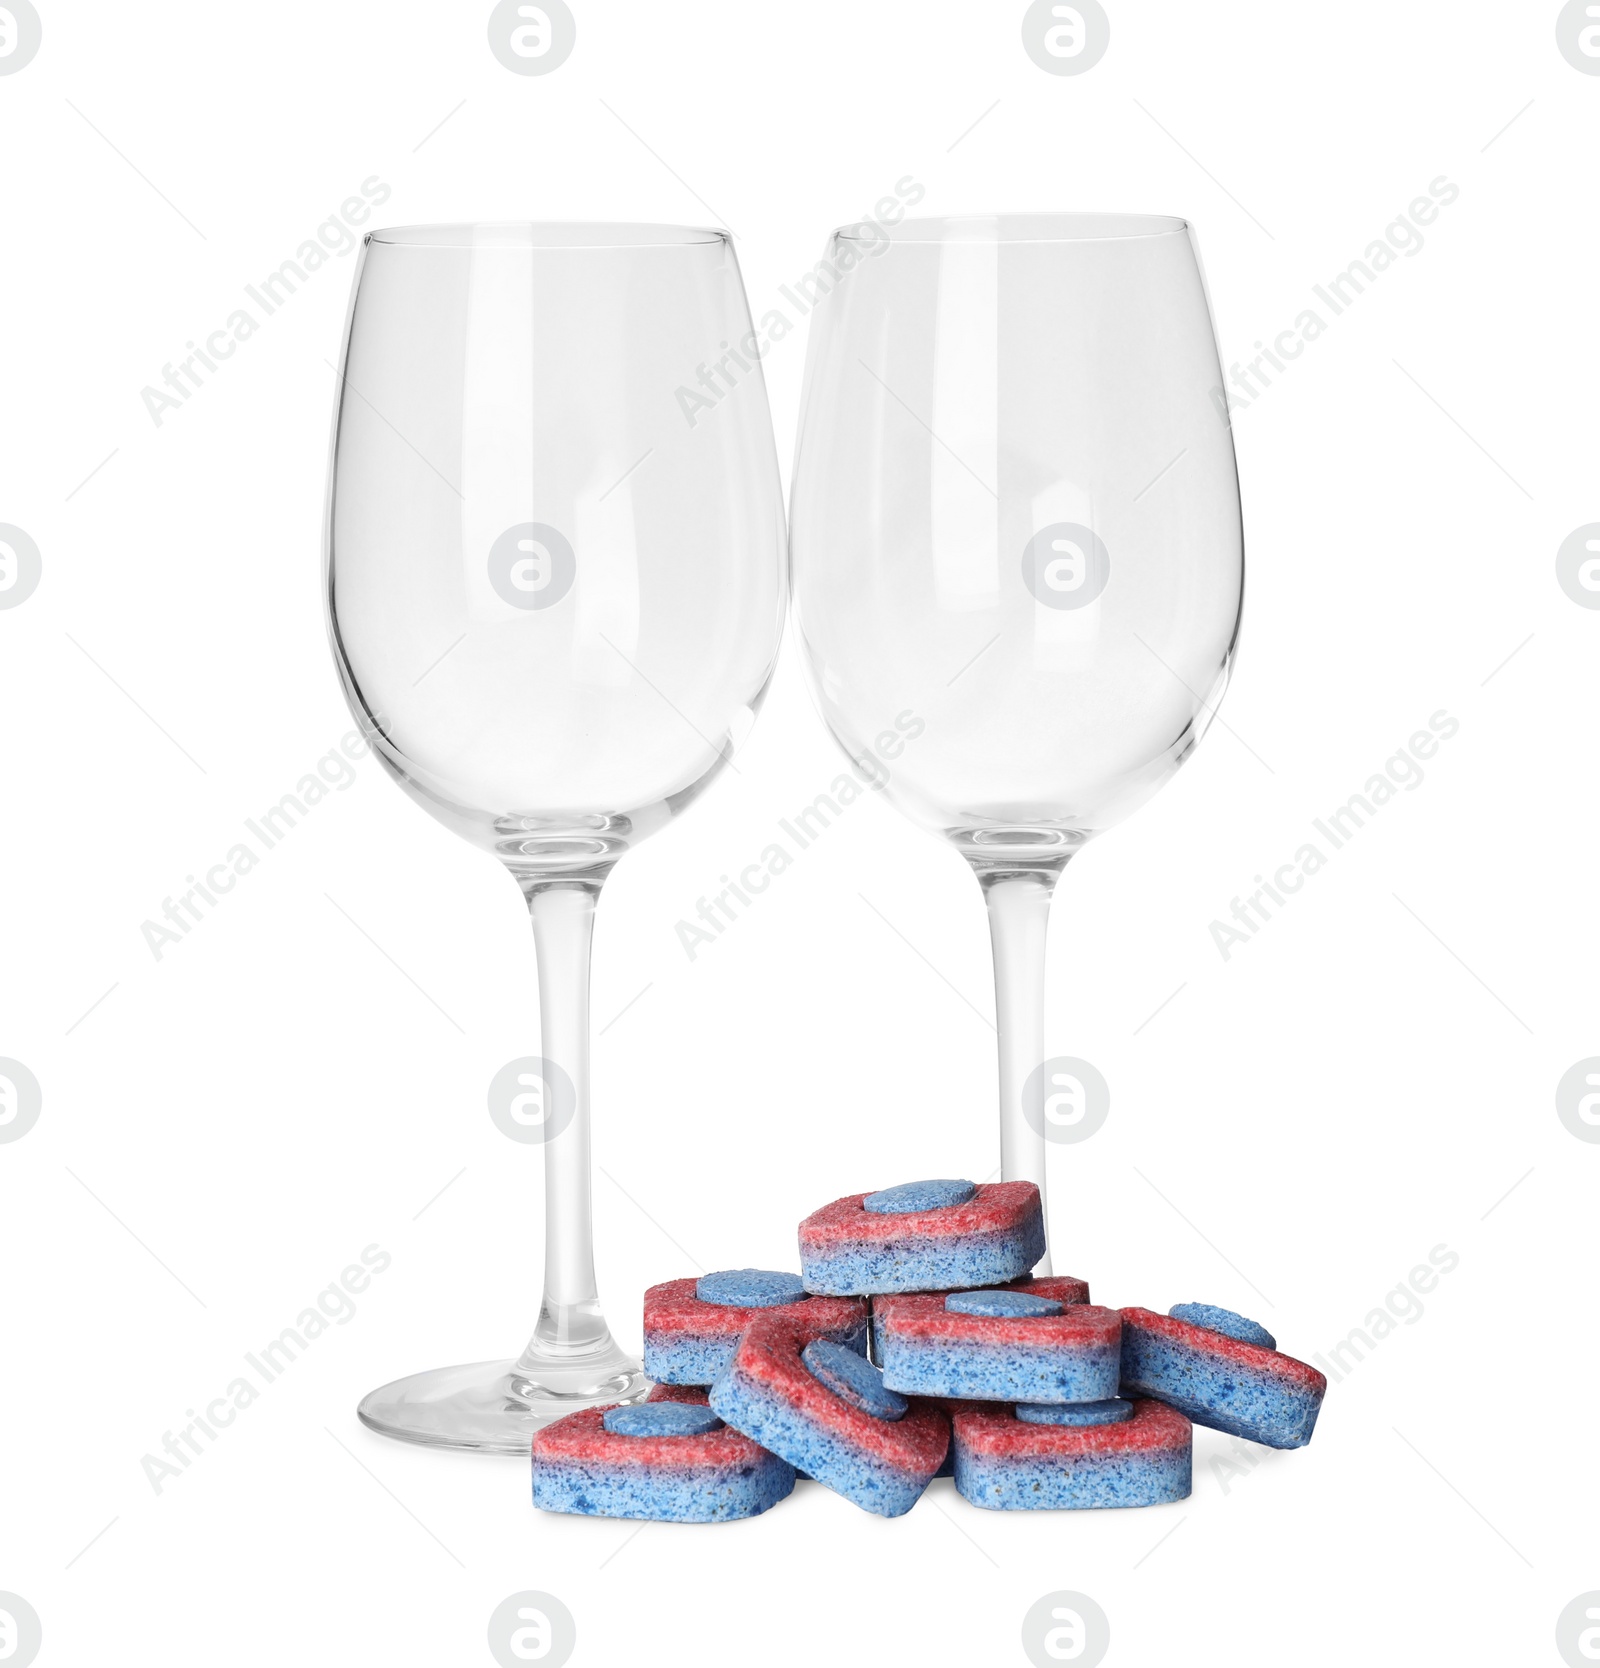 Photo of Wineglasses and many dishwasher detergent tablets on white background